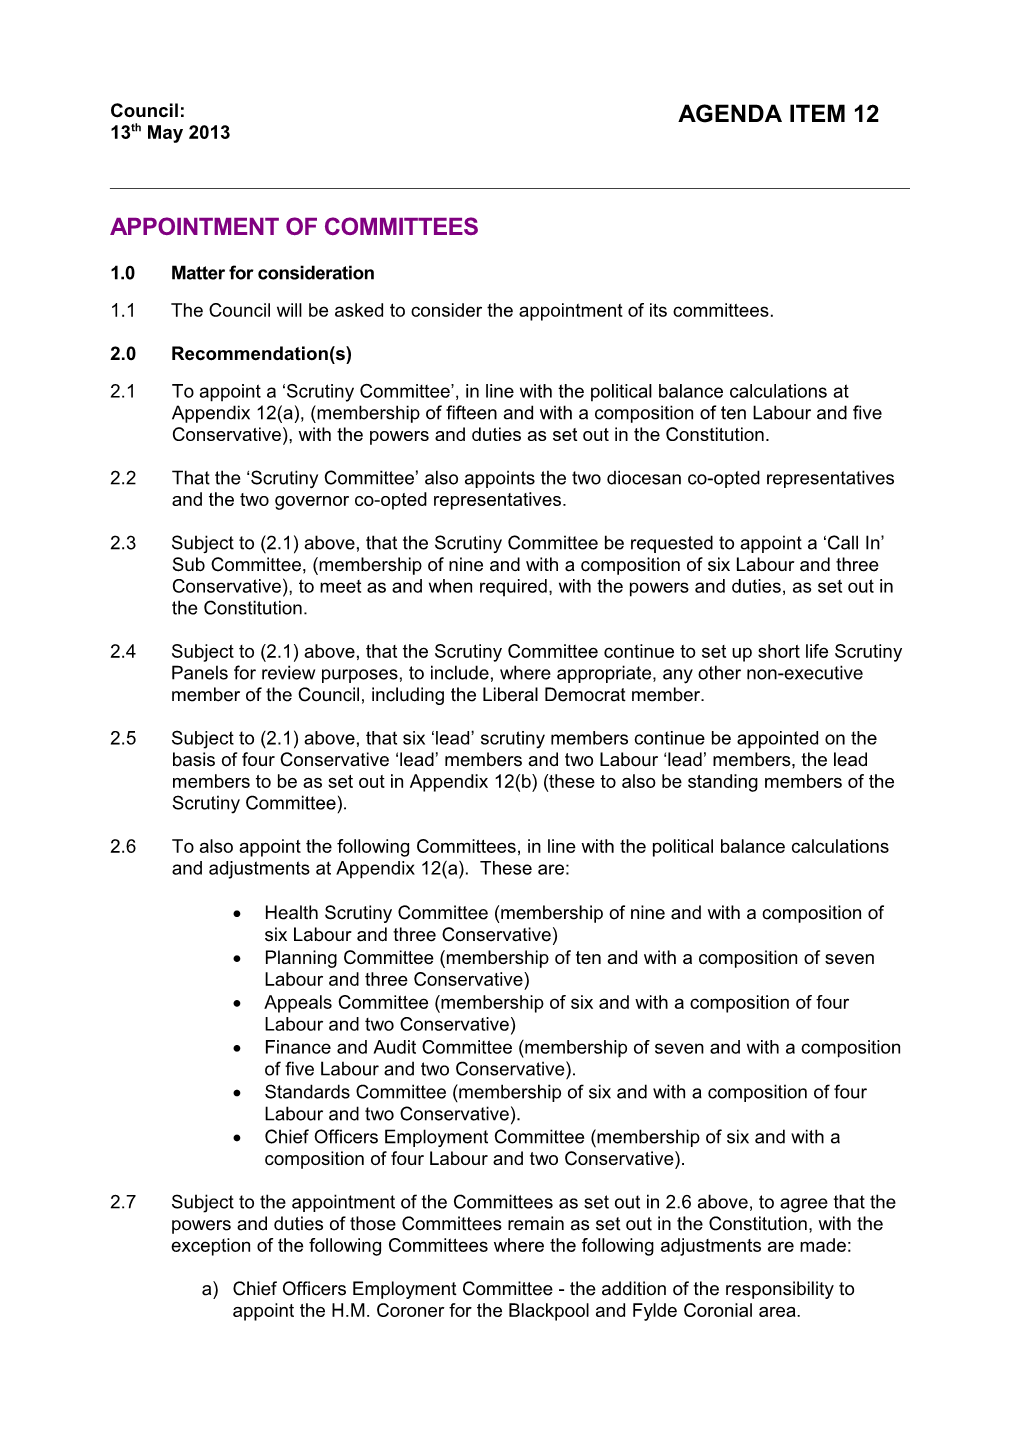 Appointment of Committees